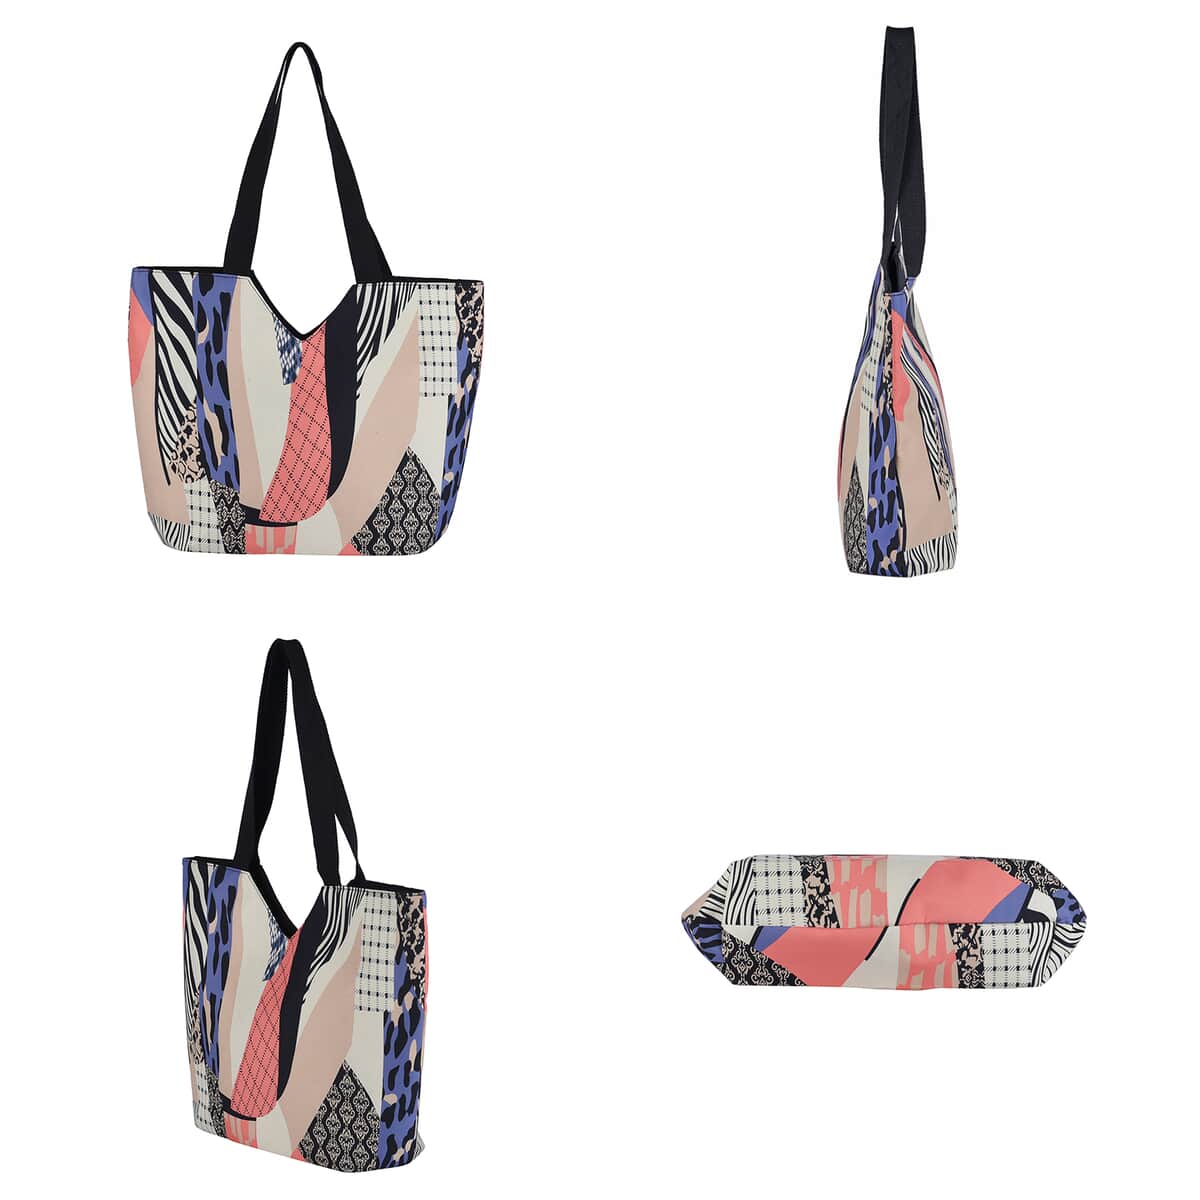 Multi Color Splice Patchwork Printed Pattern Tote Bag (17.5"x6"x13.5") with Handle Drop image number 5